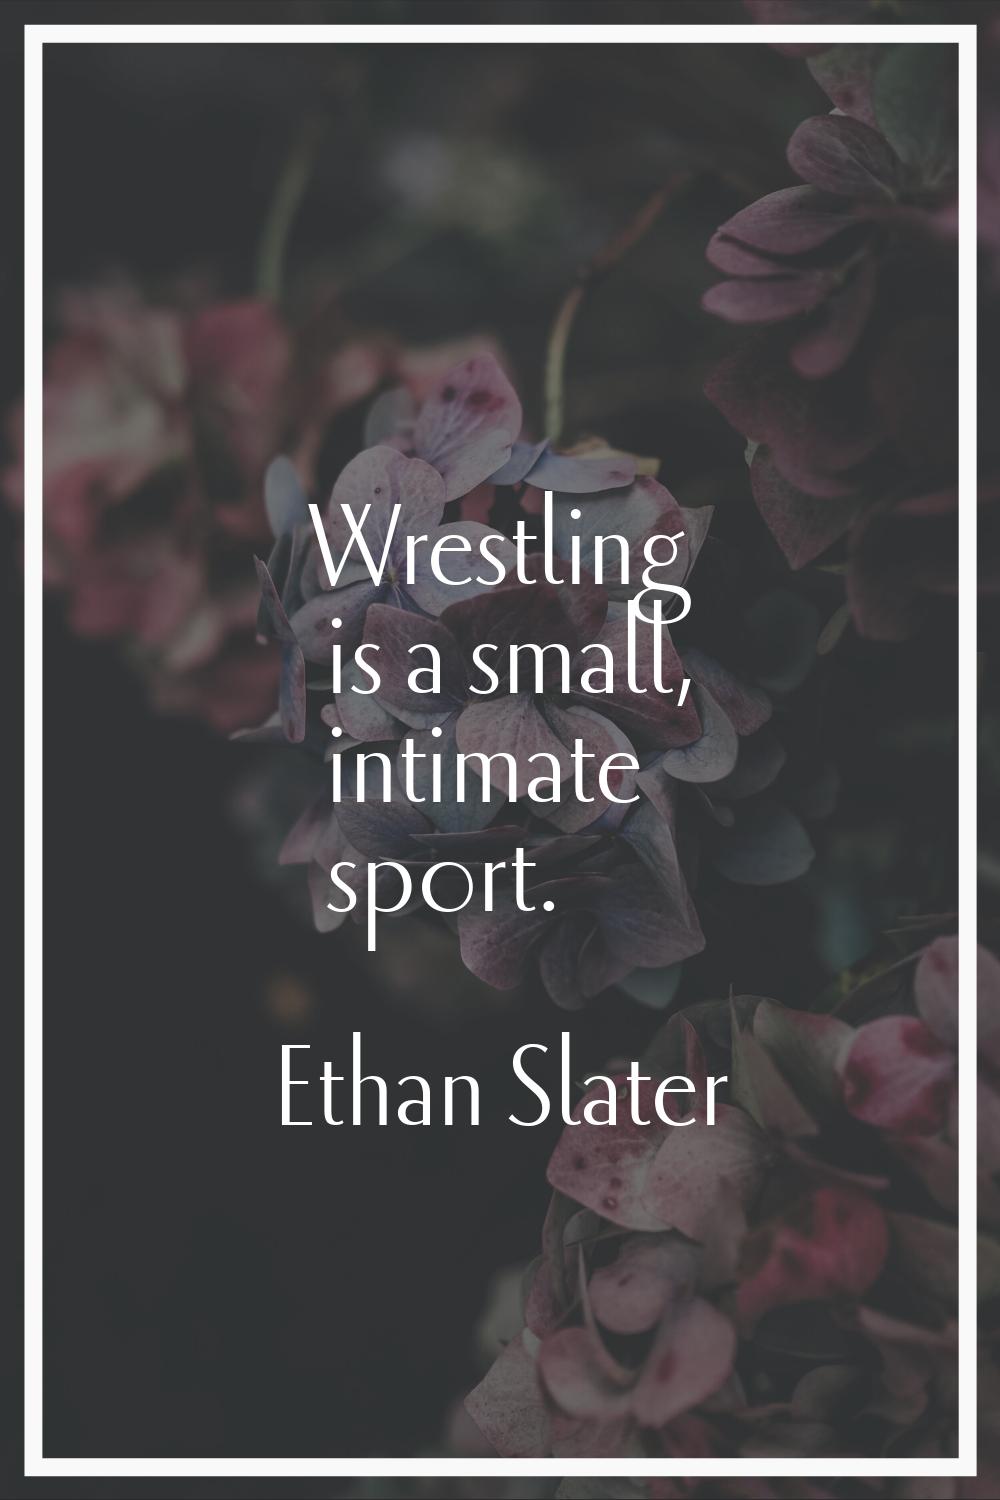 Wrestling is a small, intimate sport.